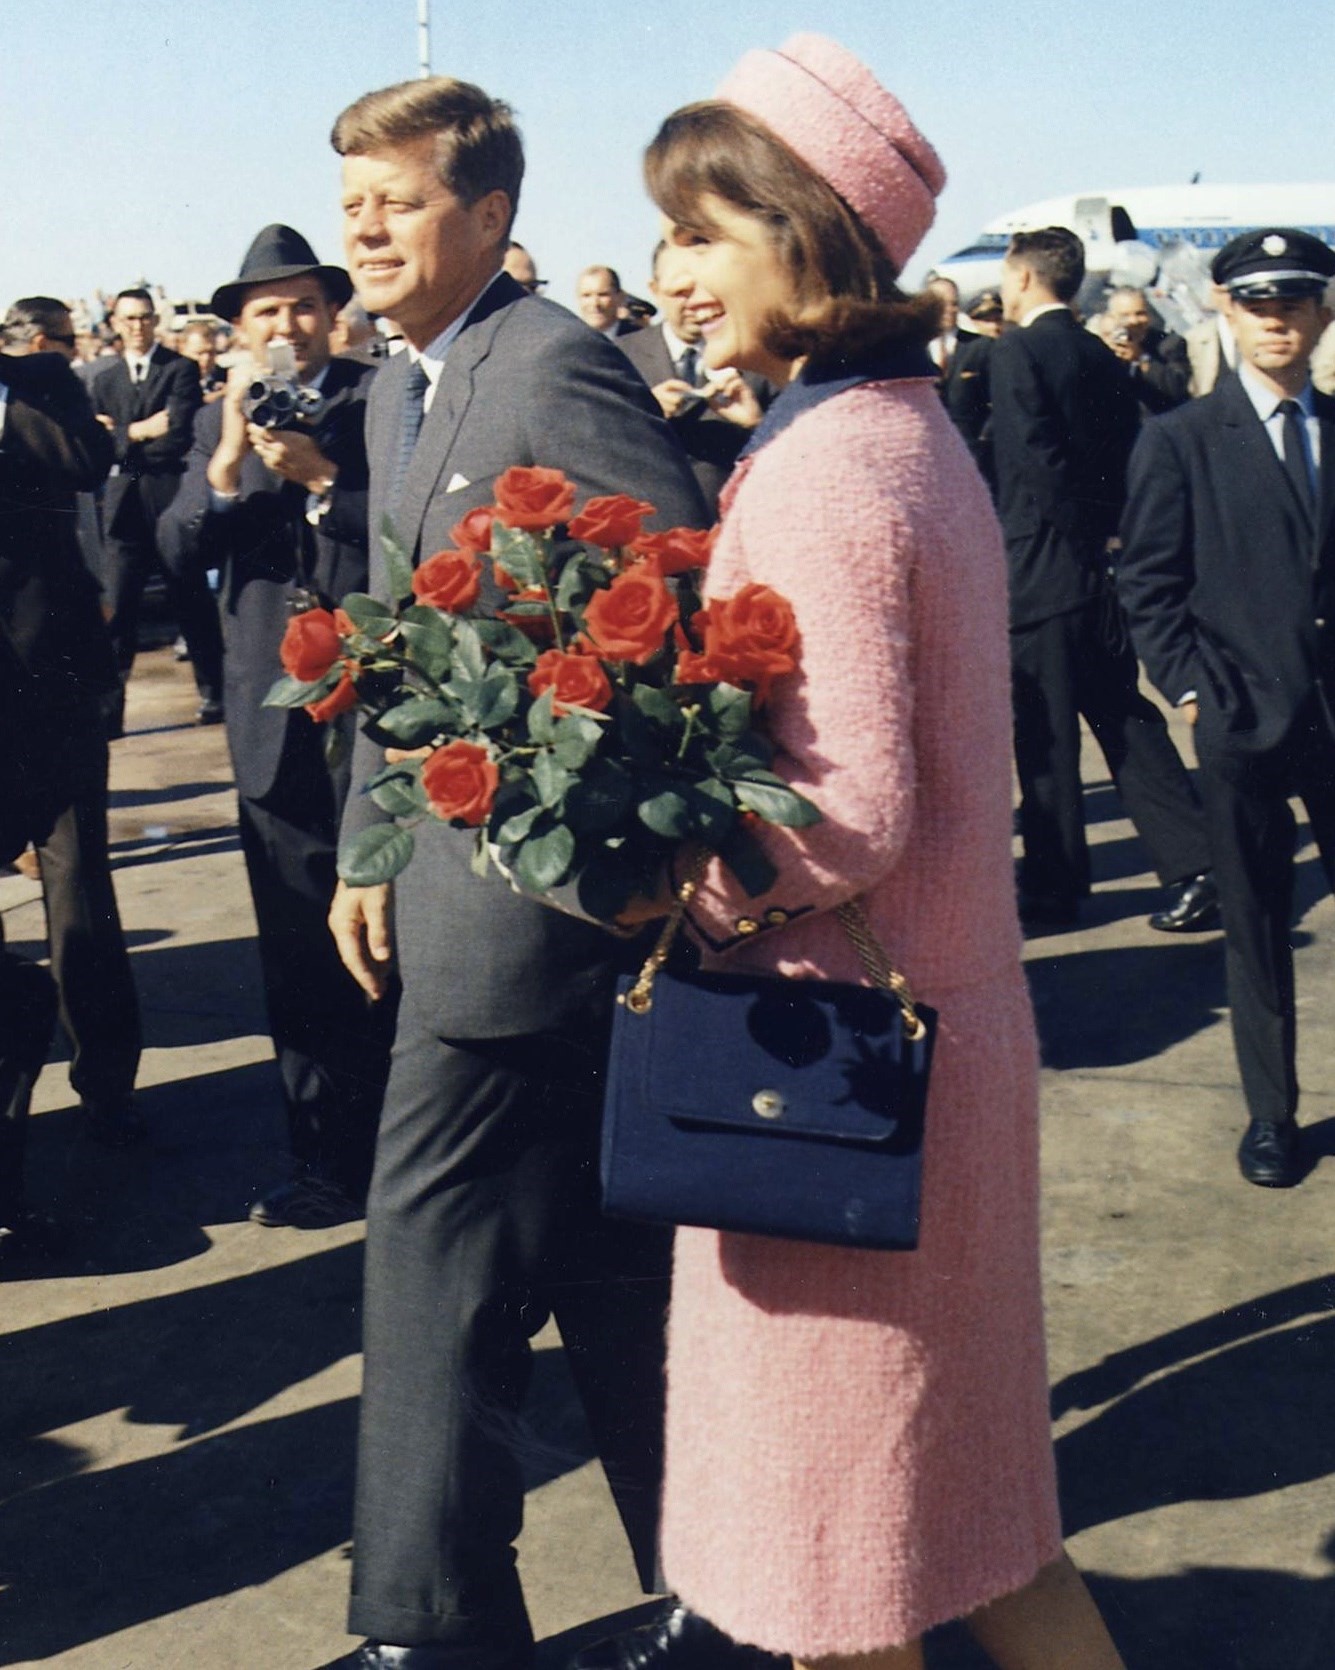 JACKIE O Kennedys_arrive_at_Dallas_11-22-63_(Cropp